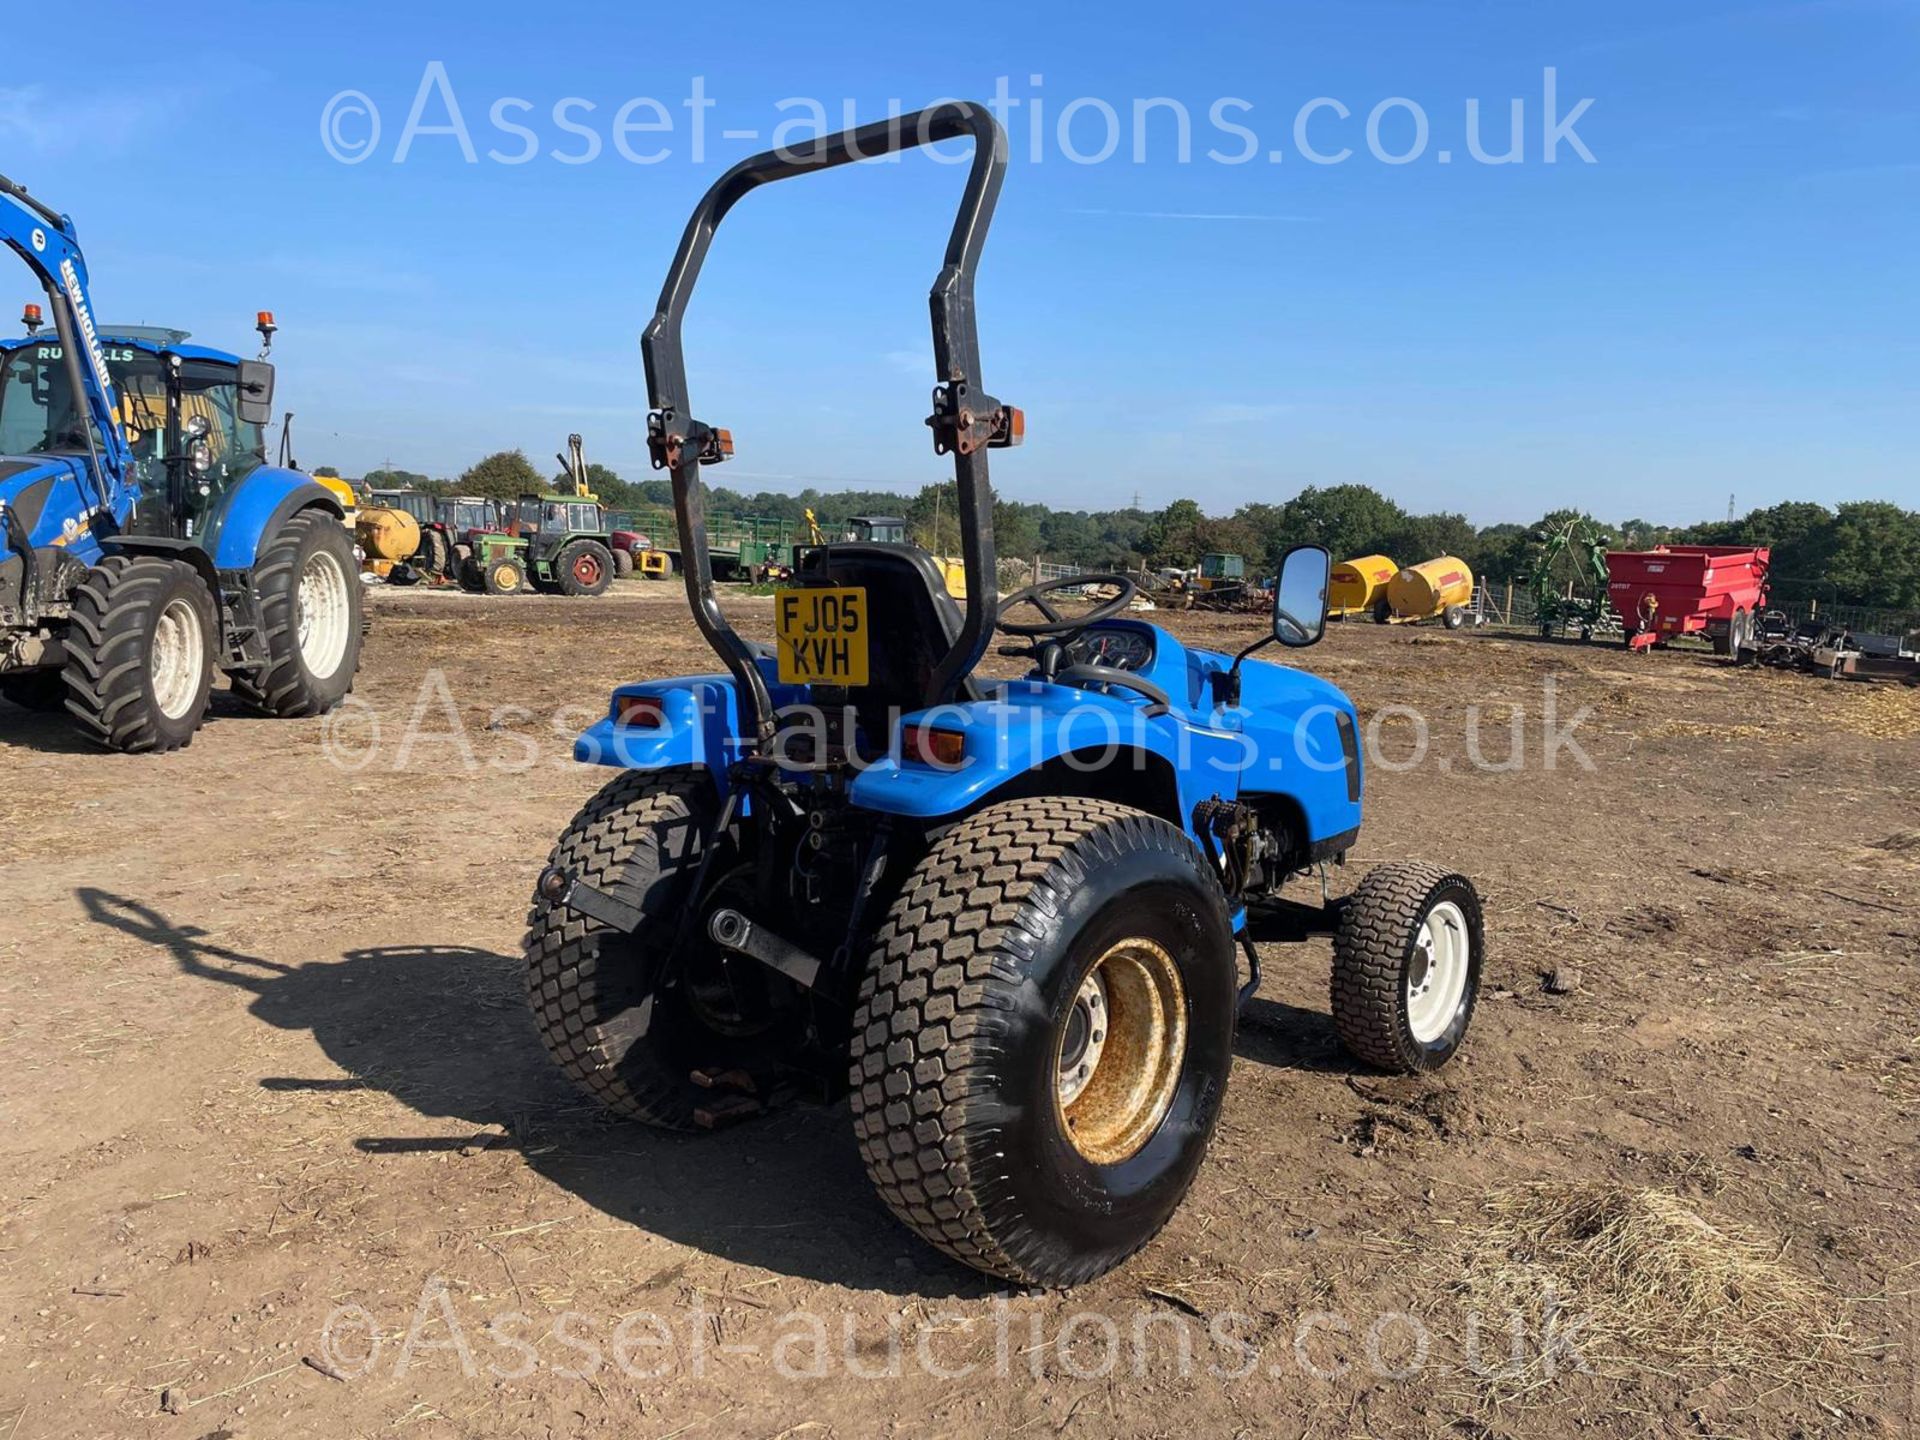 2005 NEW HOLLAND TC27DA 27hp 4WD COMPACT TRACTOR, RUNS DRIVES AND WORKS WELL, ROAD REGISTERED - Image 13 of 26